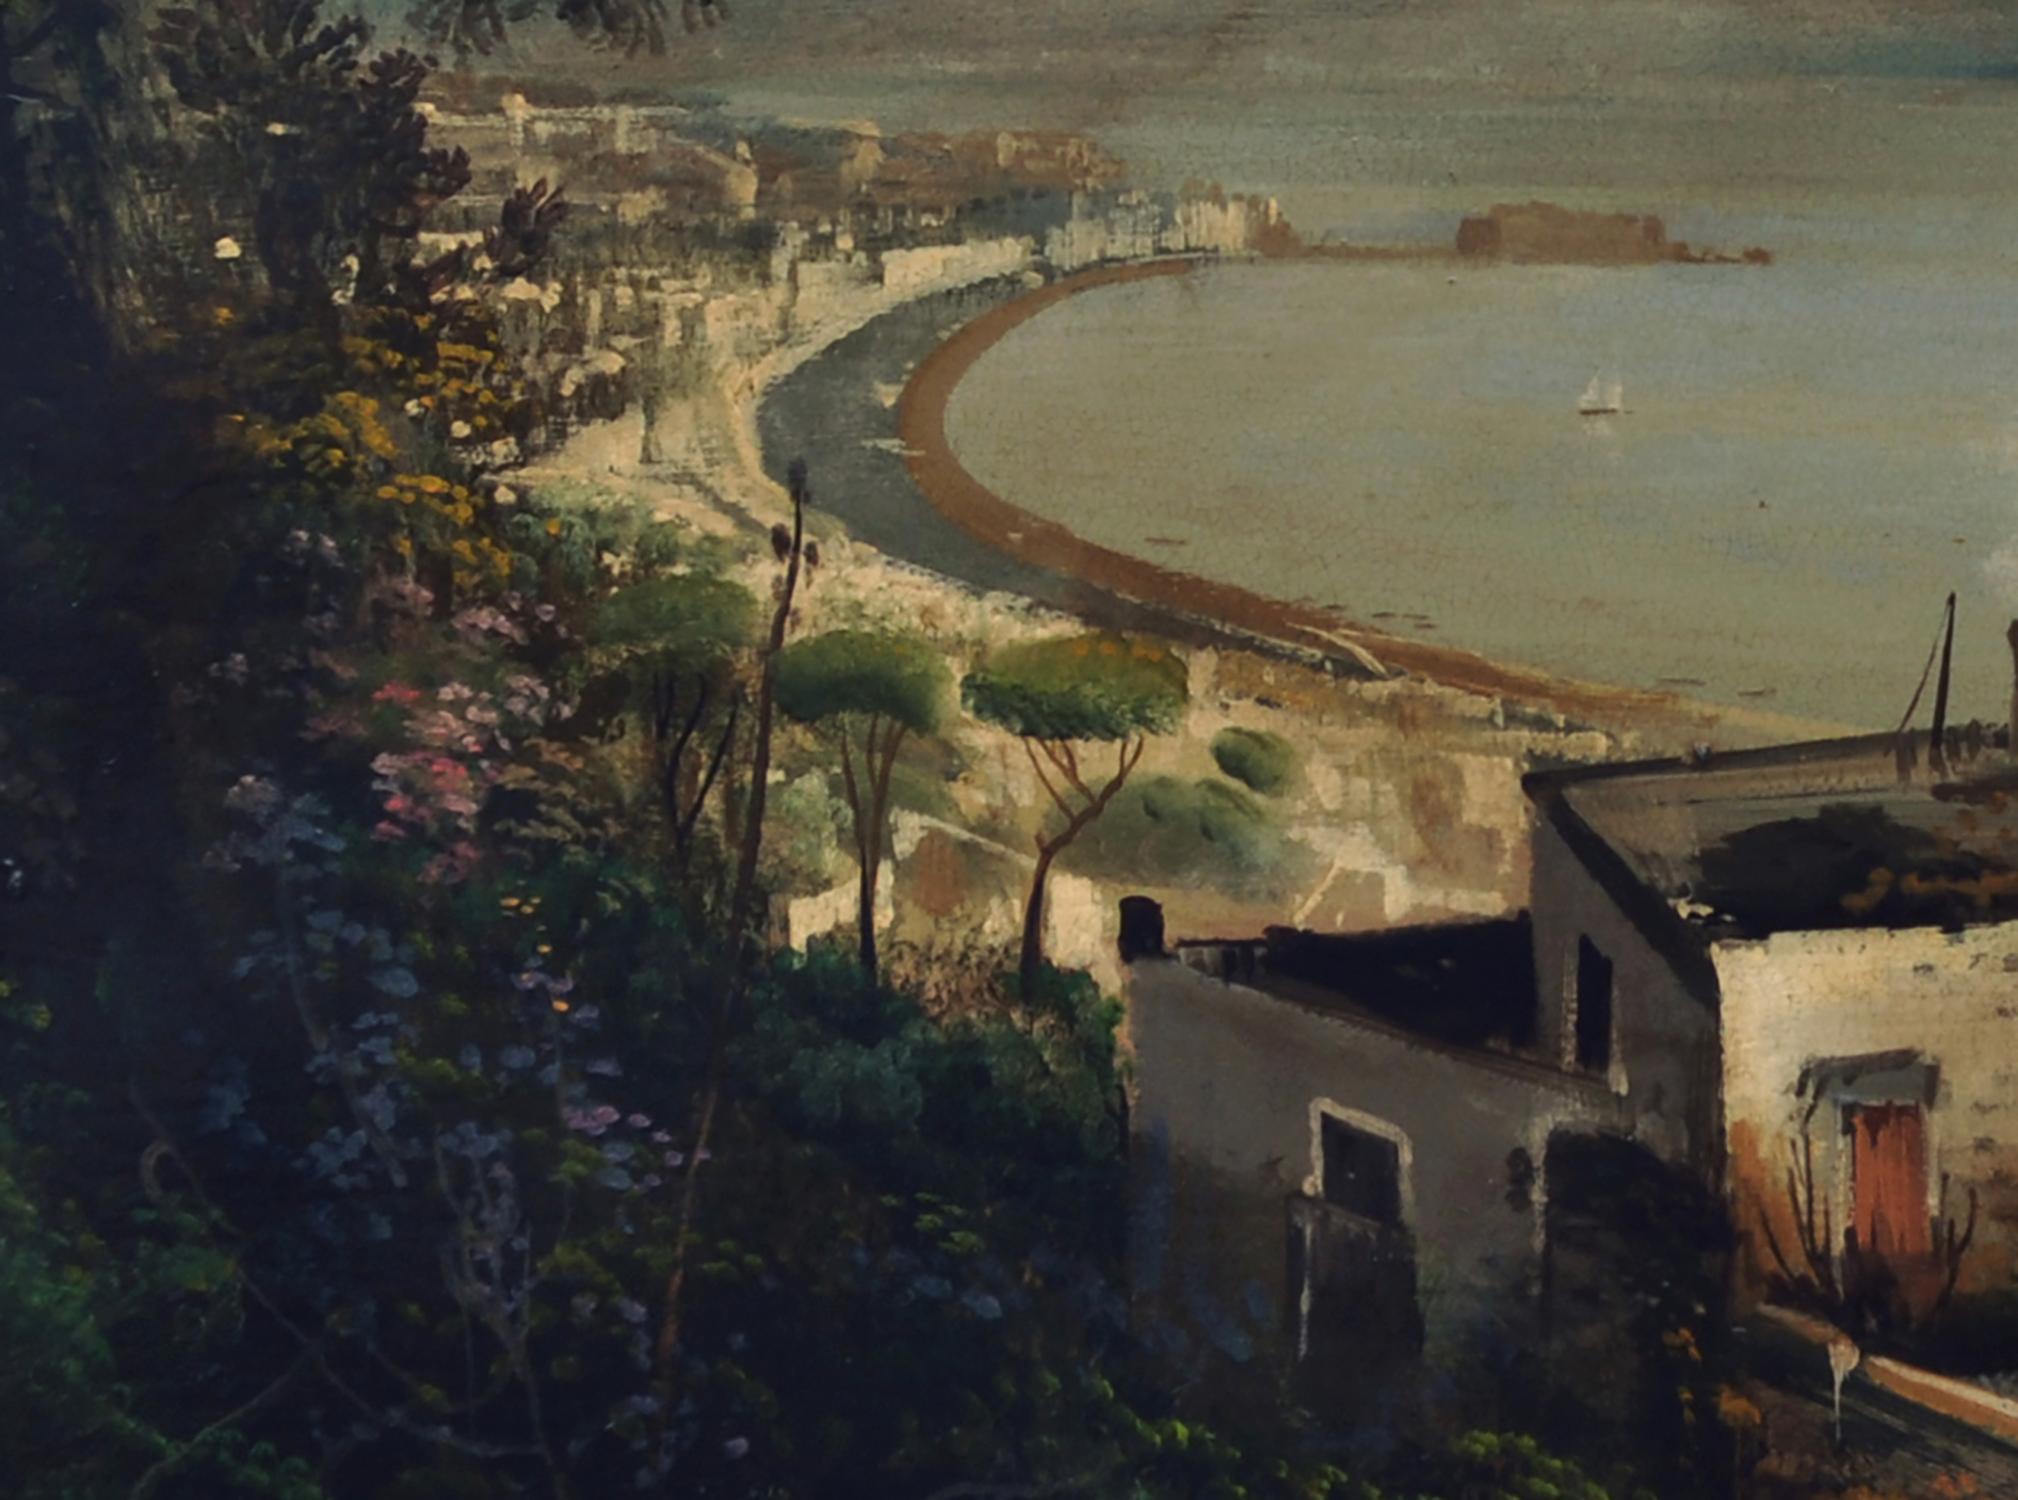 Naples - Ettore Ferrante Italia 2004 - Oil on canvas cm.40x60.

In this wonderful canvas E. Ferrante depicts the Gulf of Naples seen from Posillipo. Ferrante was inspired by the masters of the Posillipo School, including Antonio Pitloo and Giacinto